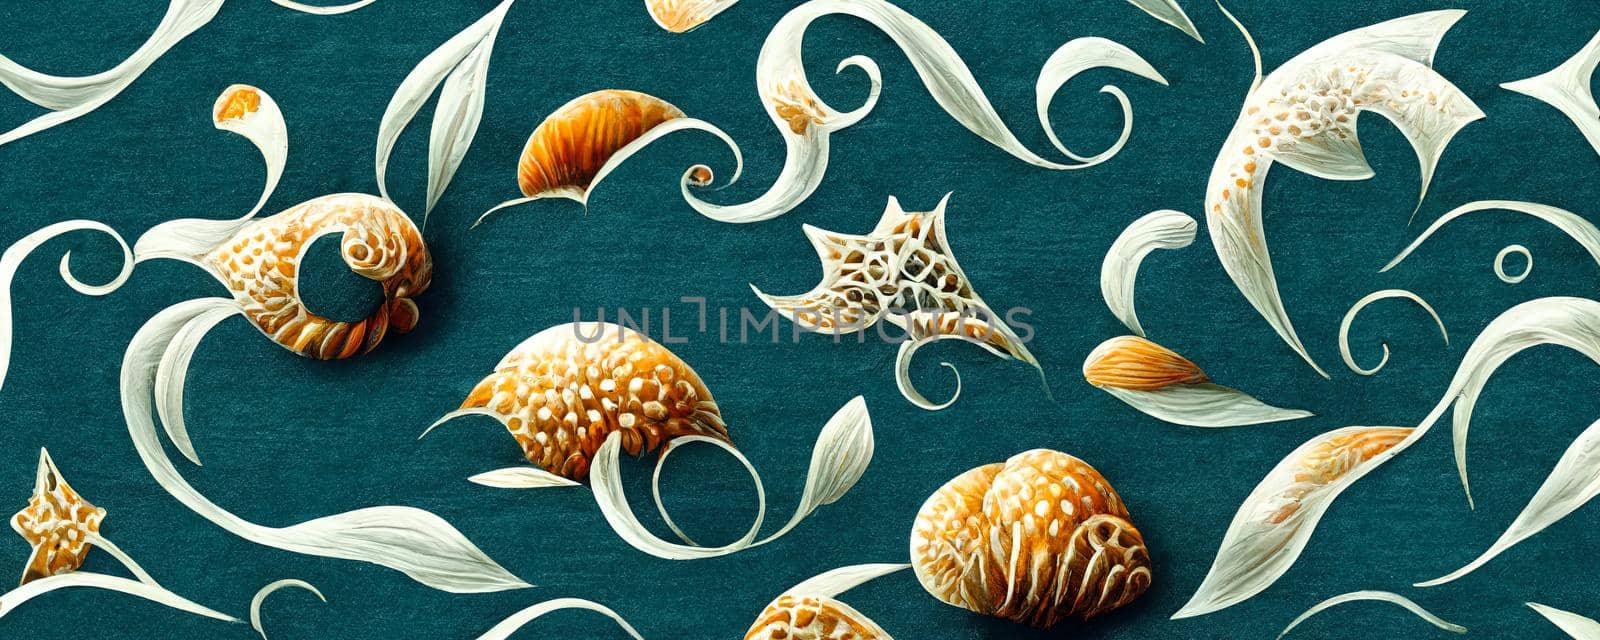 drawing on fabric on a marine theme with shells and waves by TRMK